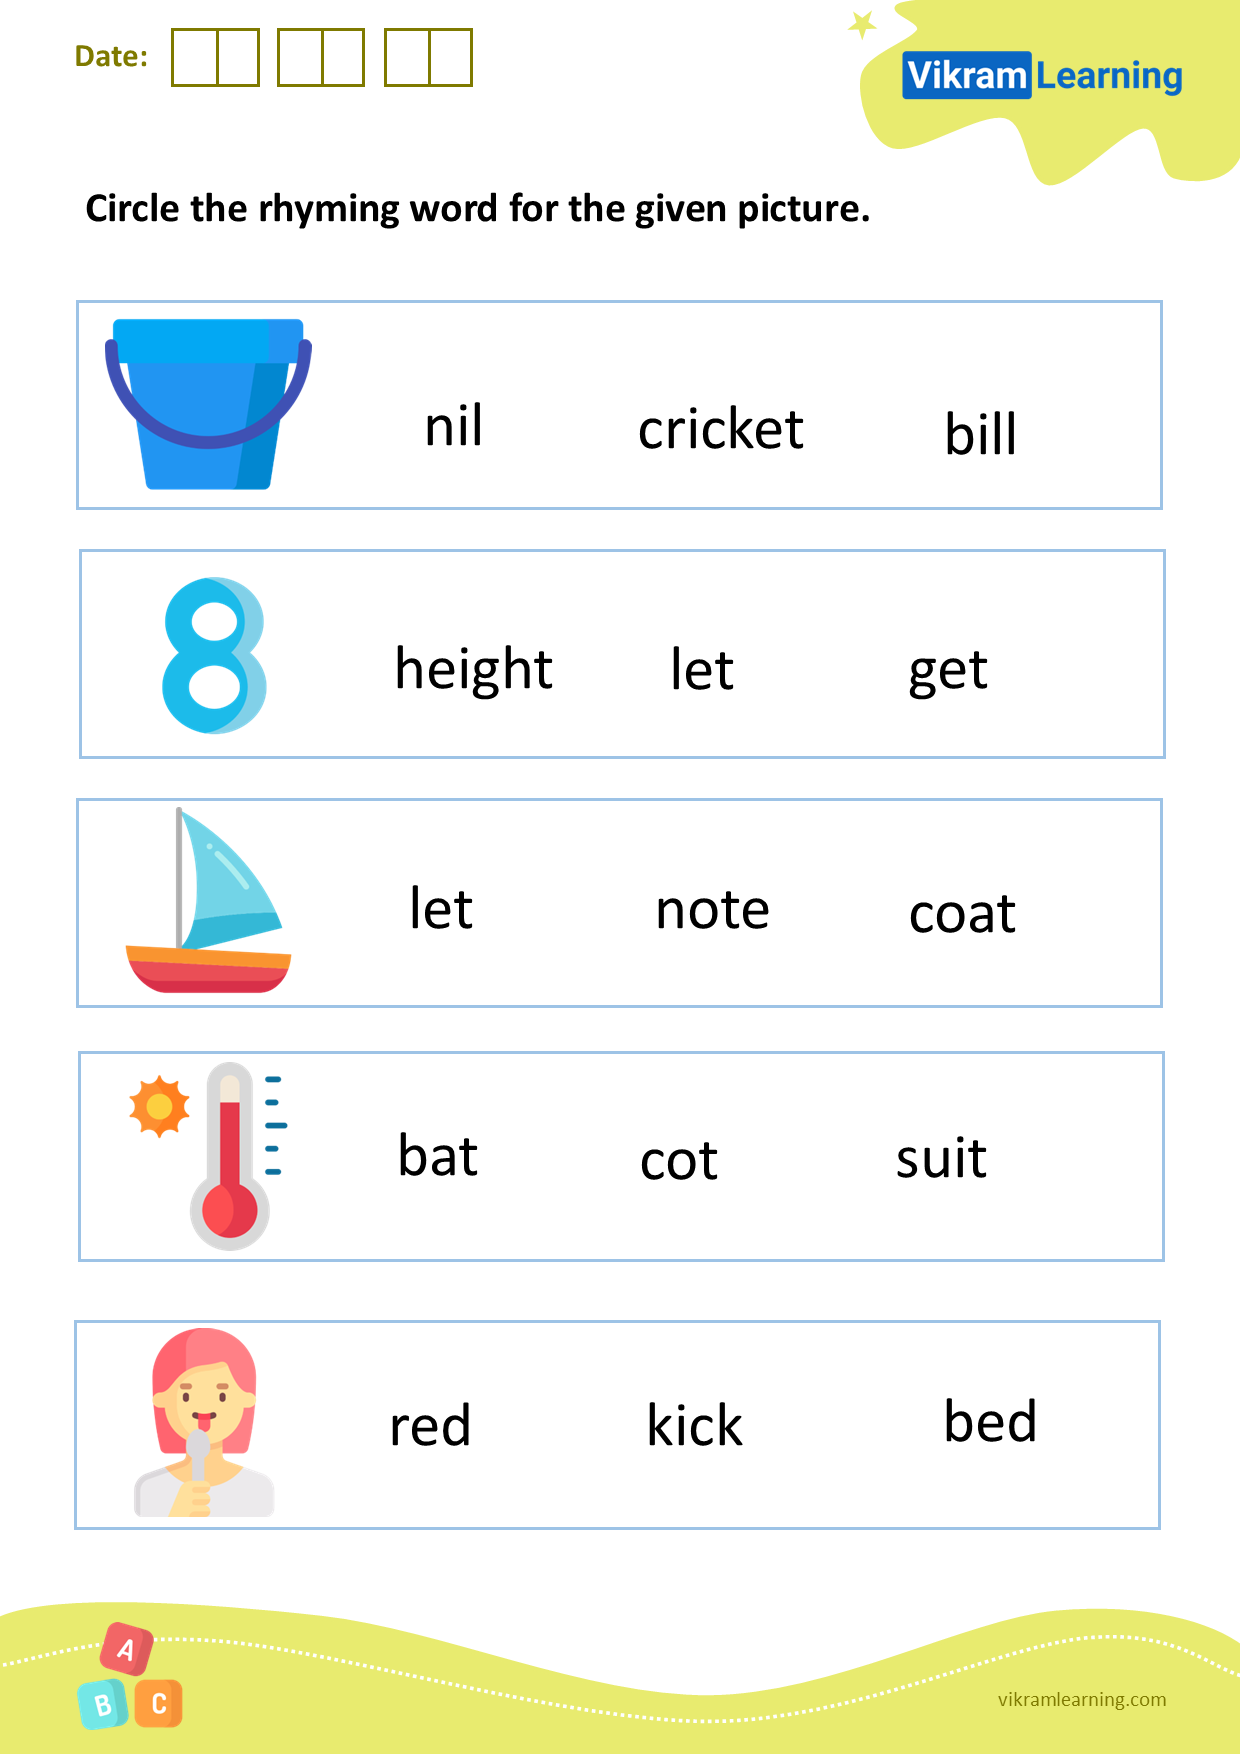 download-circle-the-rhyming-word-for-the-given-picture-worksheets